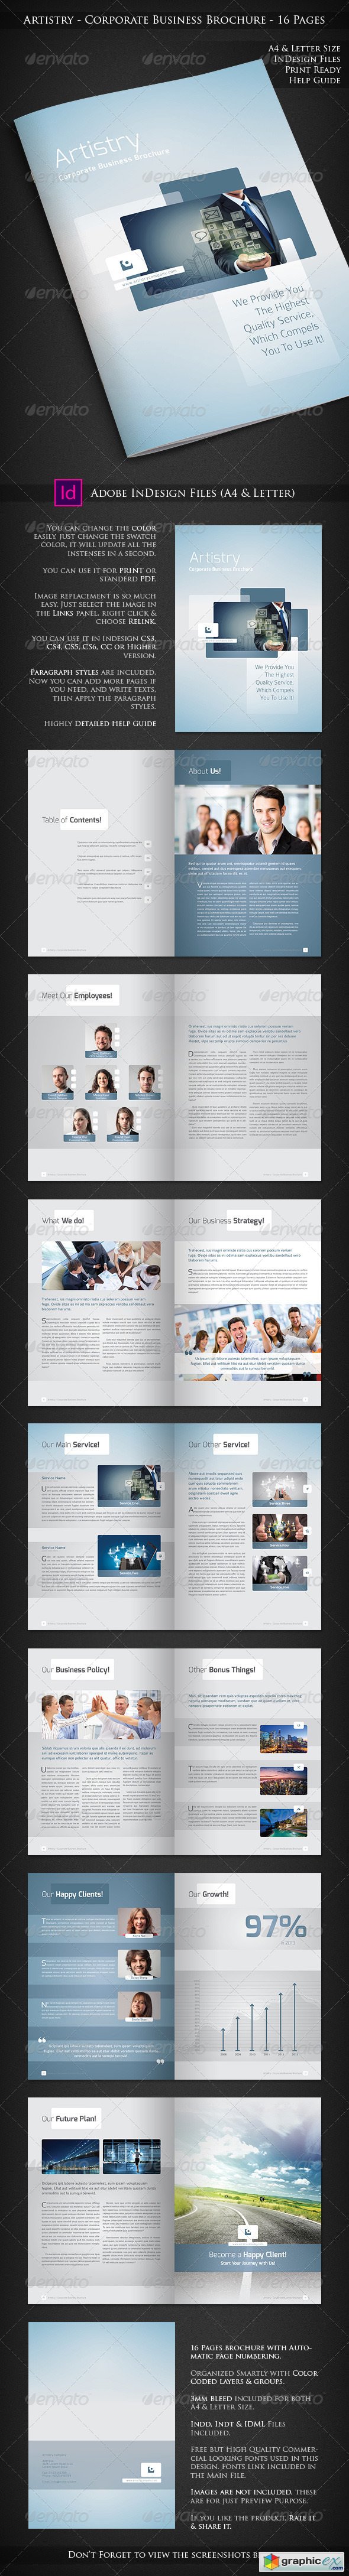 Artistry - Corporate Business Brochure - 16 Pages